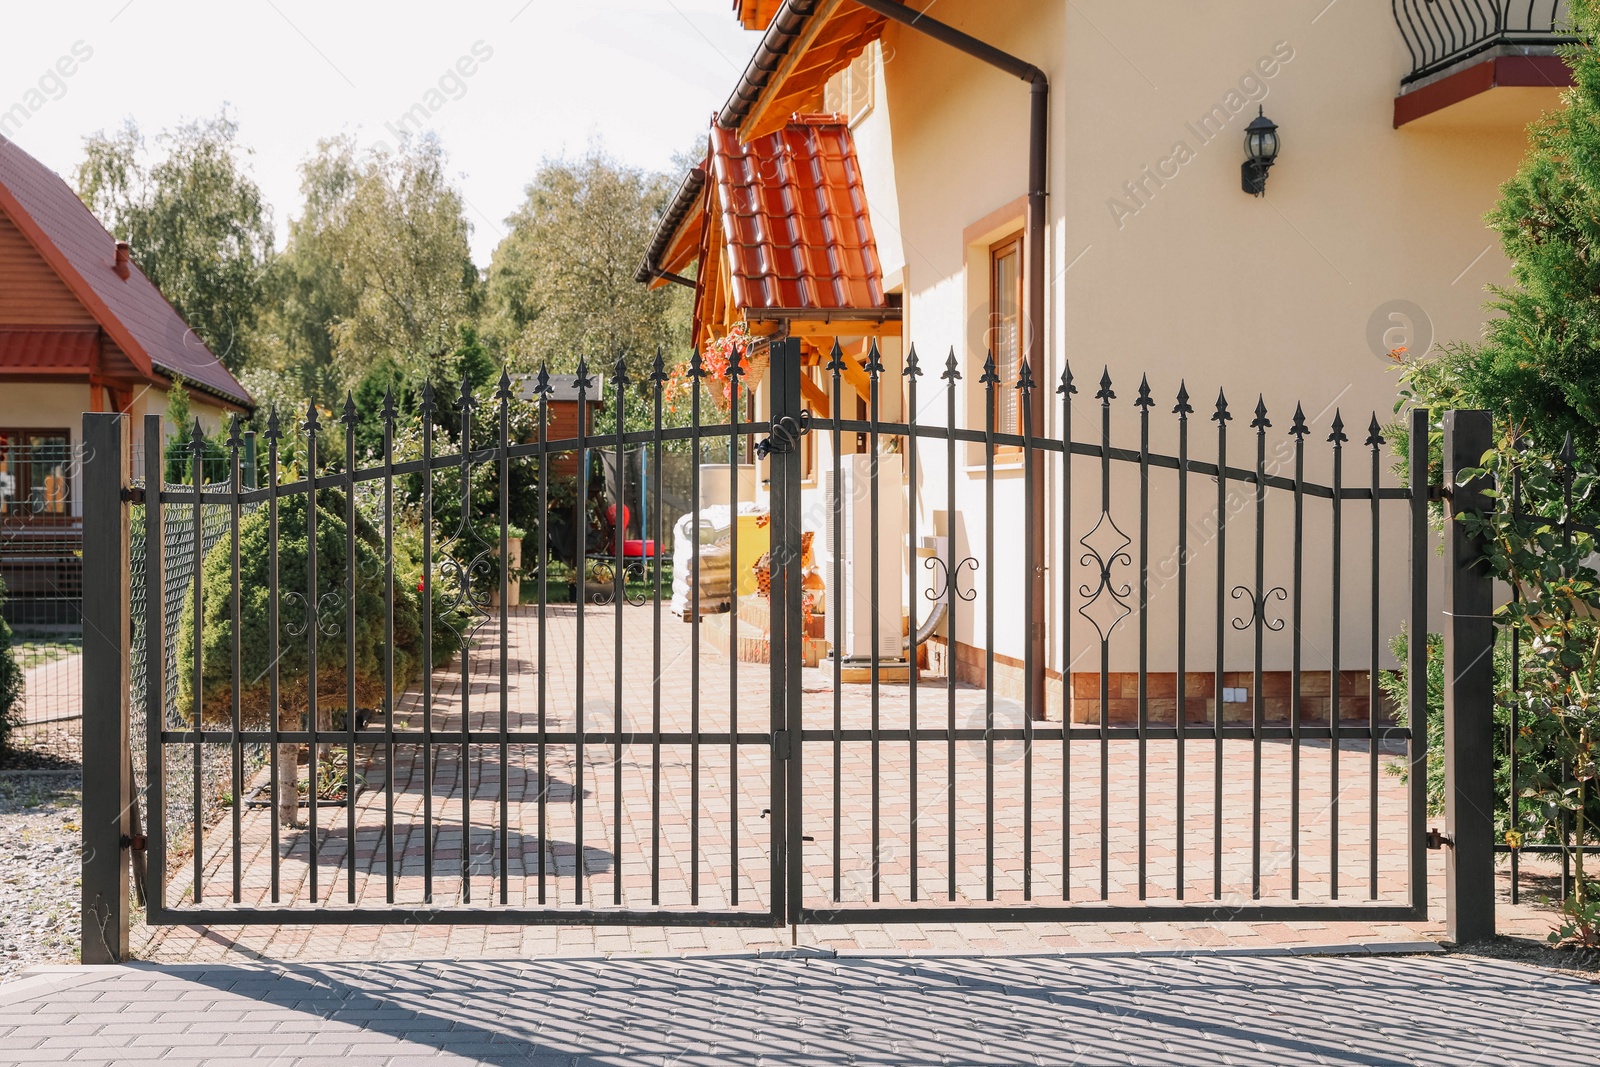 Photo of Closed metal gates near beautiful house on sunny day